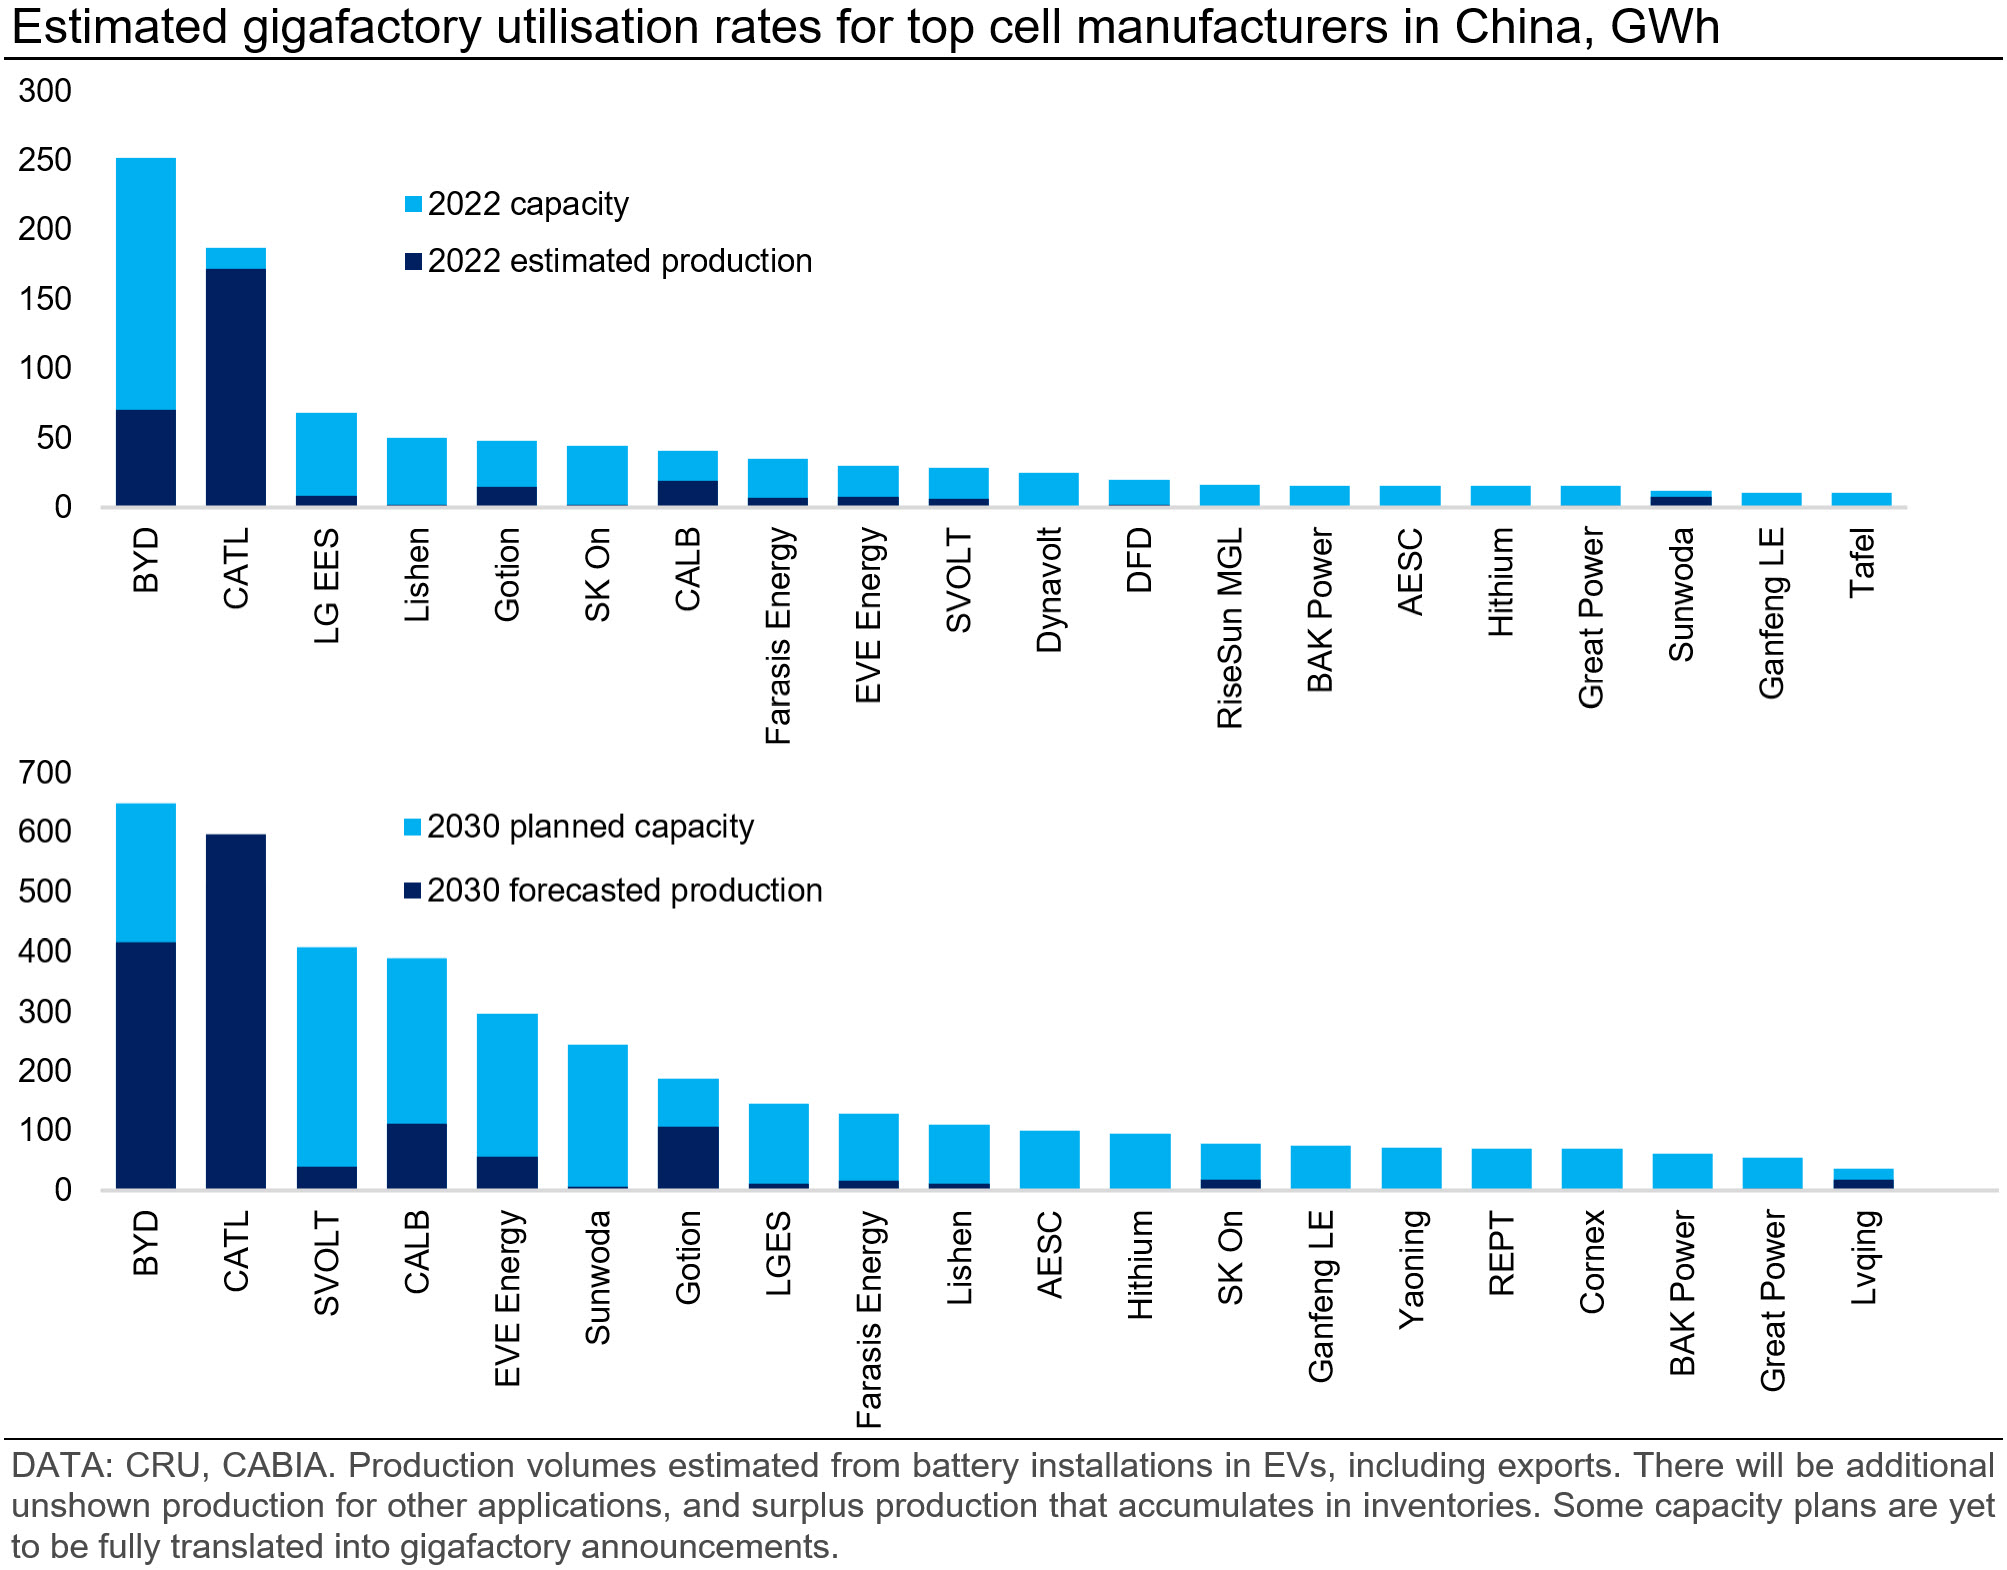 Two graphs showing estimated gigafactory utilisation rates for top cell manufacturers